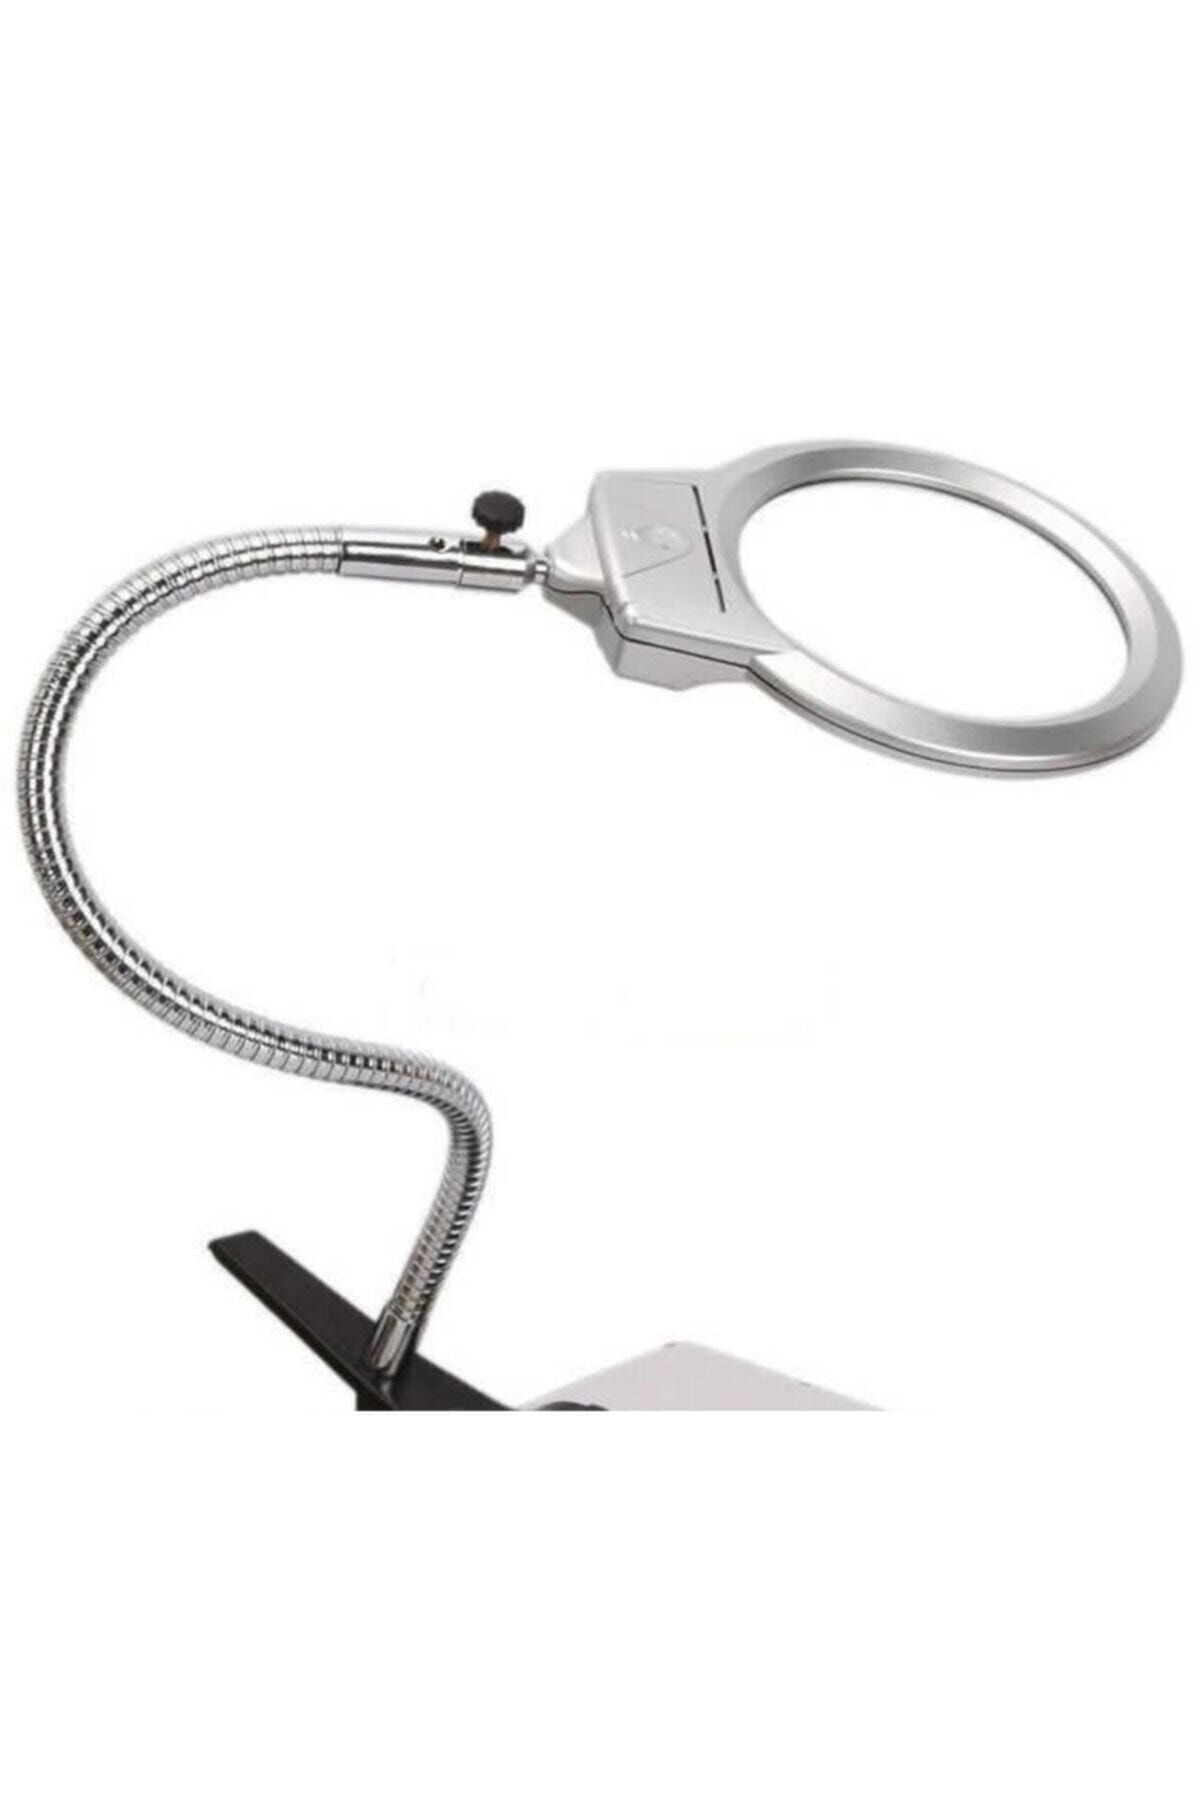 MucizeOyuncaklar Magnifier with Latch Adjustable Head and Led Light 130 mm  - Trendyol